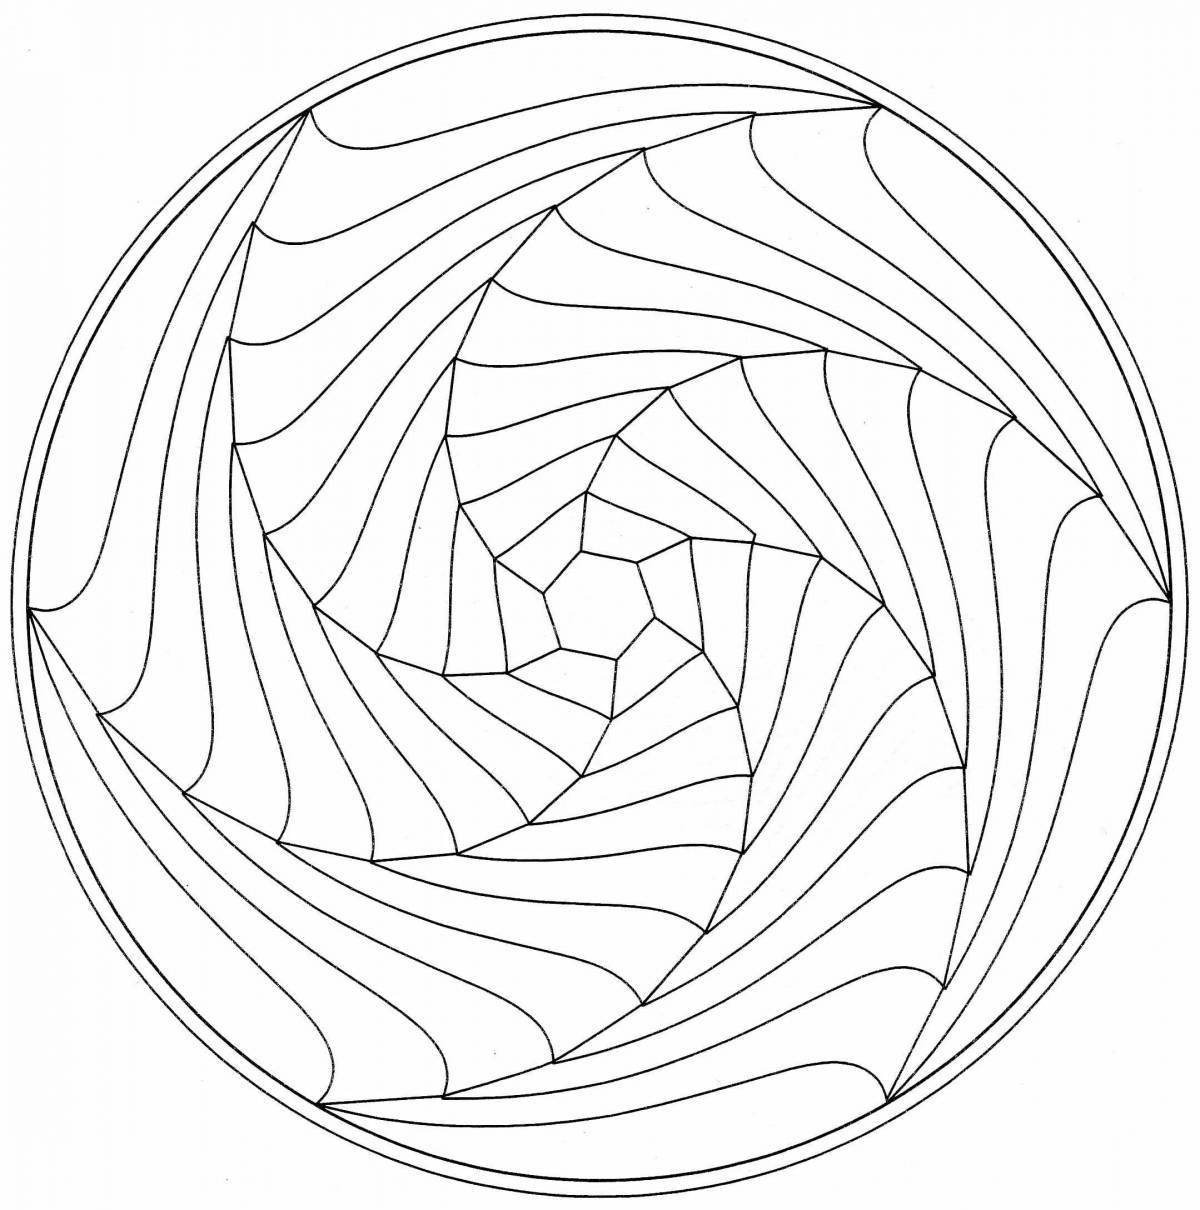 Coloring page with delicate circular pattern